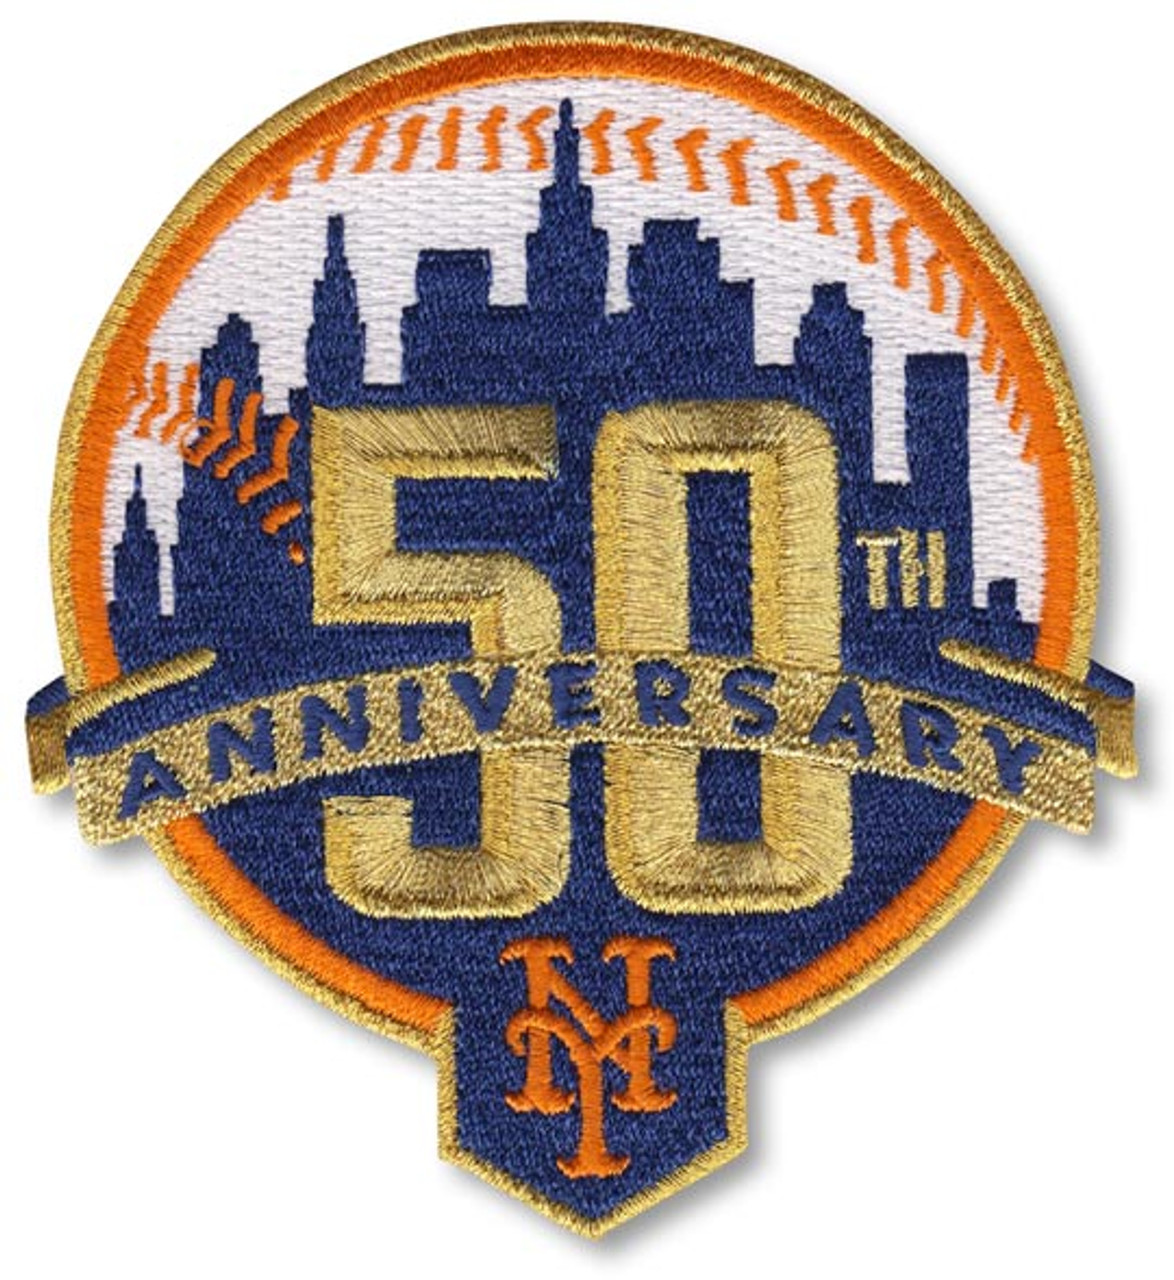 New York Mets Primary Logo Patch